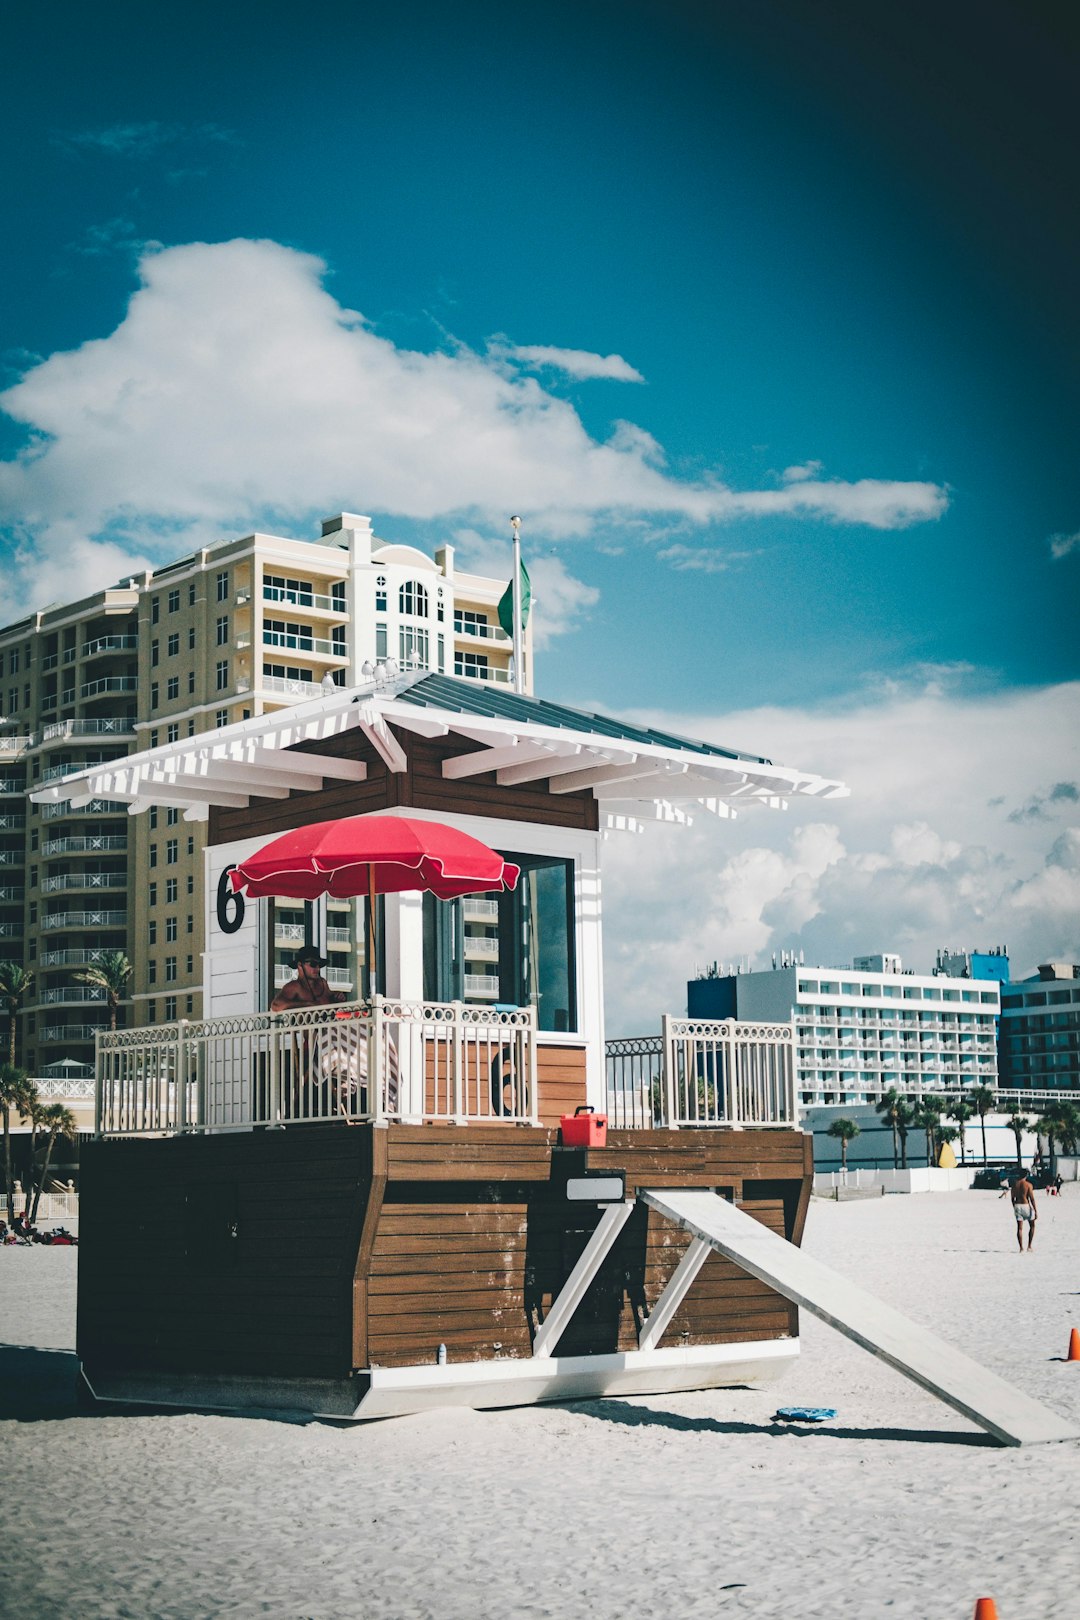 brown and white wooden lifeguard house on beach near hotel and buildings under blue and white skies during daytime